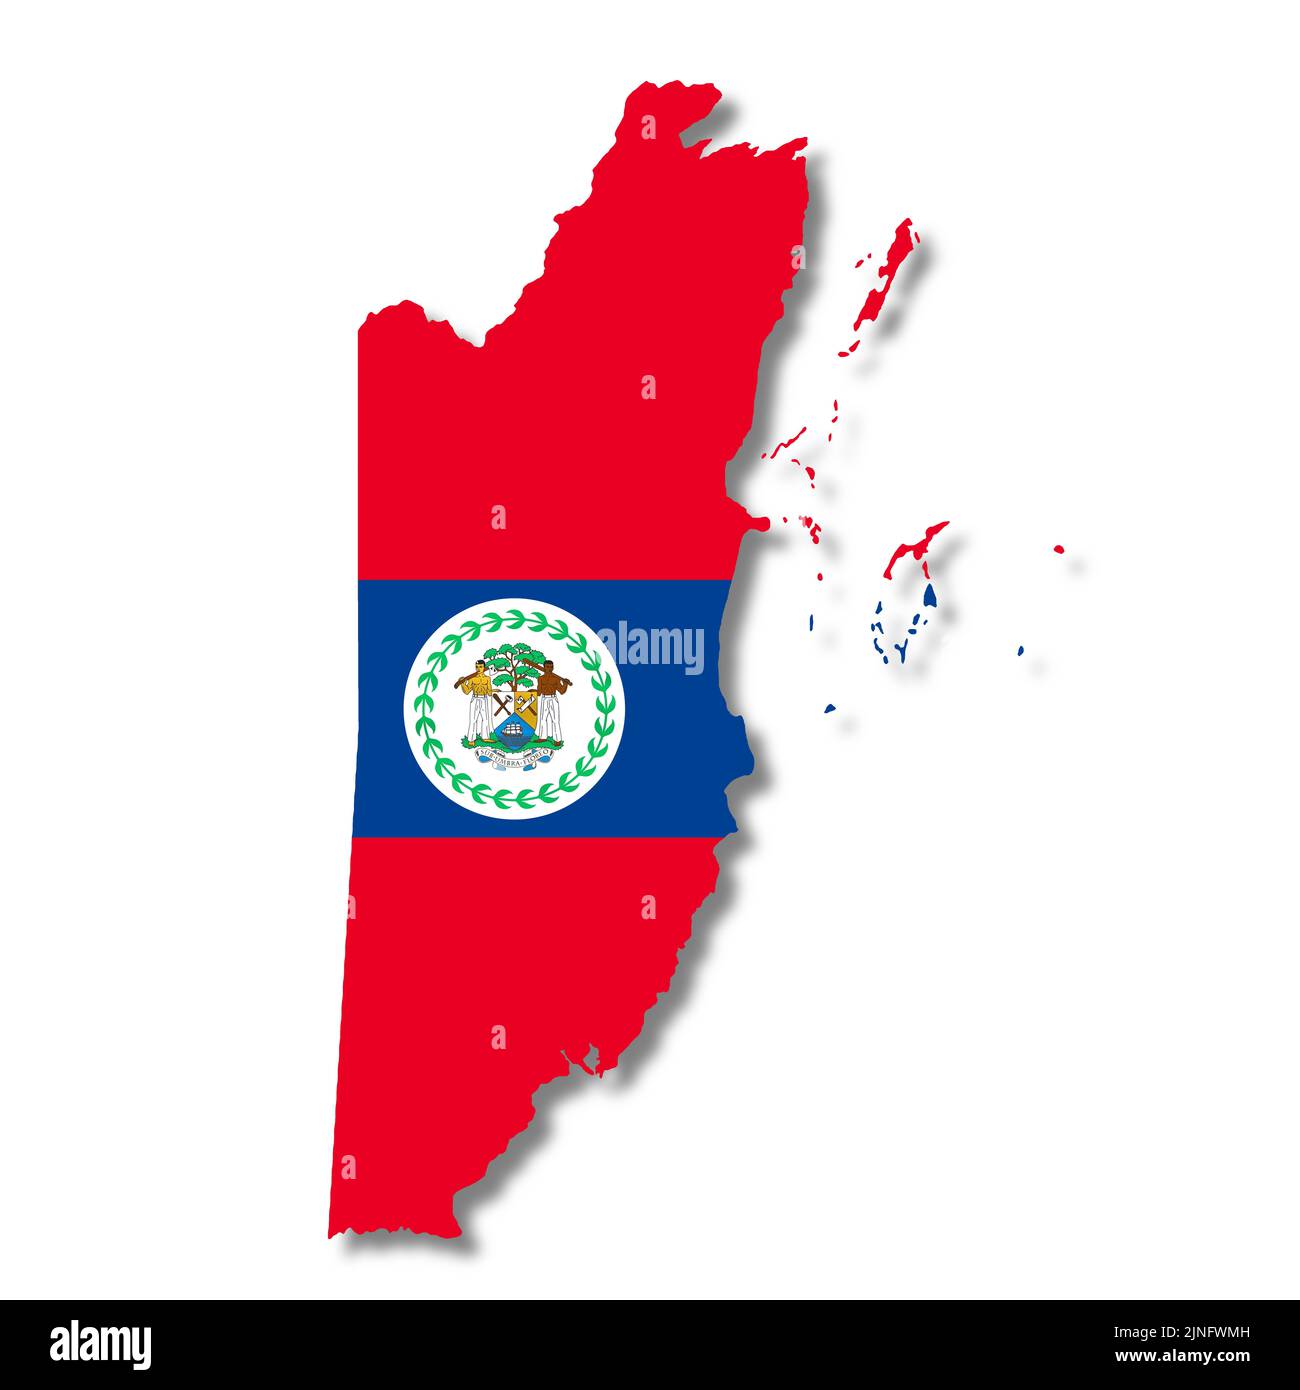 Belize flag map on white background 3d illustration with clipping path Stock Photo